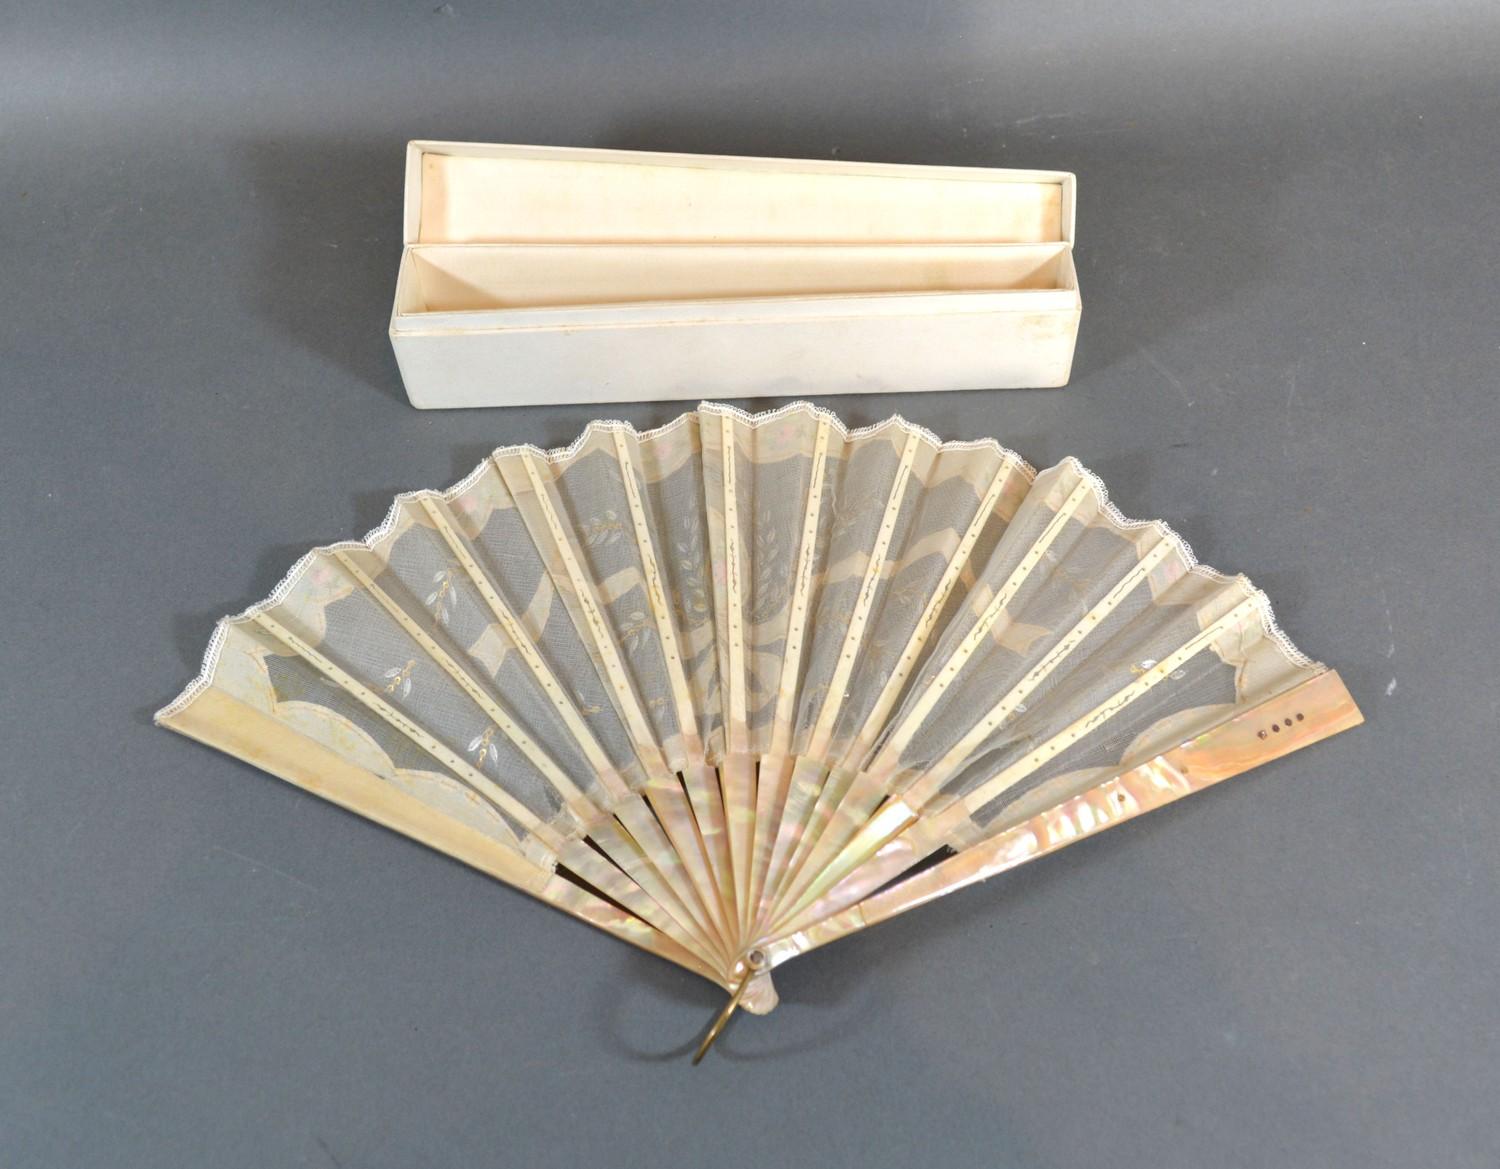 A Mother-Of-Pearl and Gauze Leaf Fan with sequin decorated mother-of-pearl guards and sticks and - Image 2 of 2